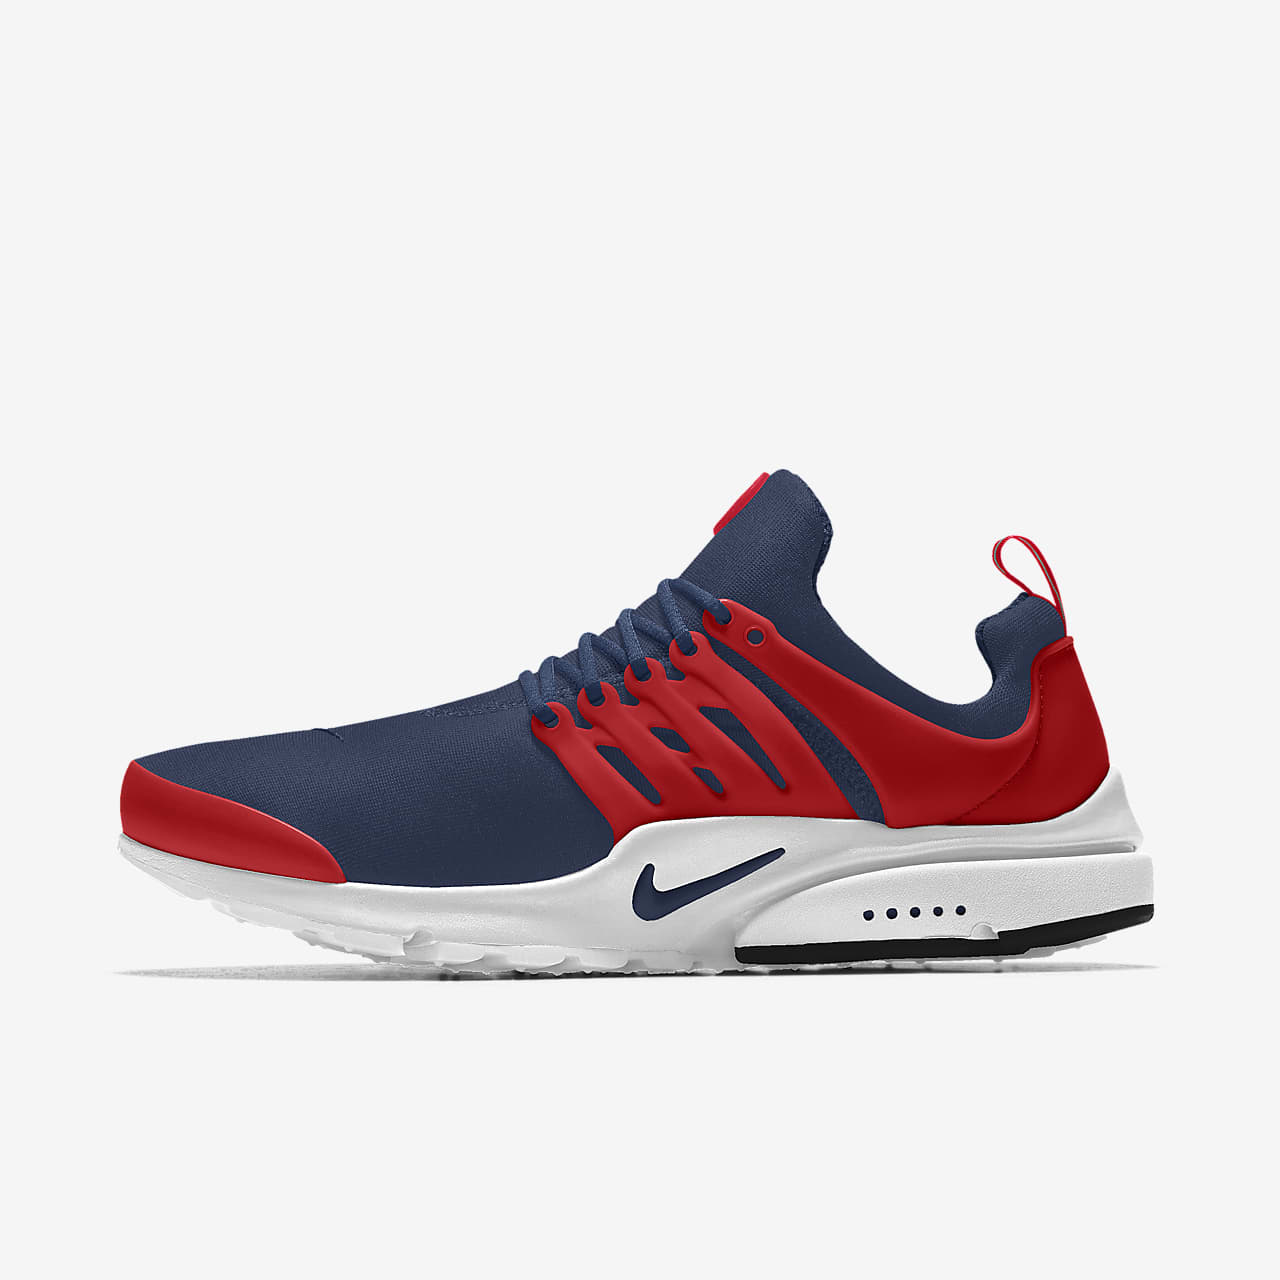 nike air presto red and black